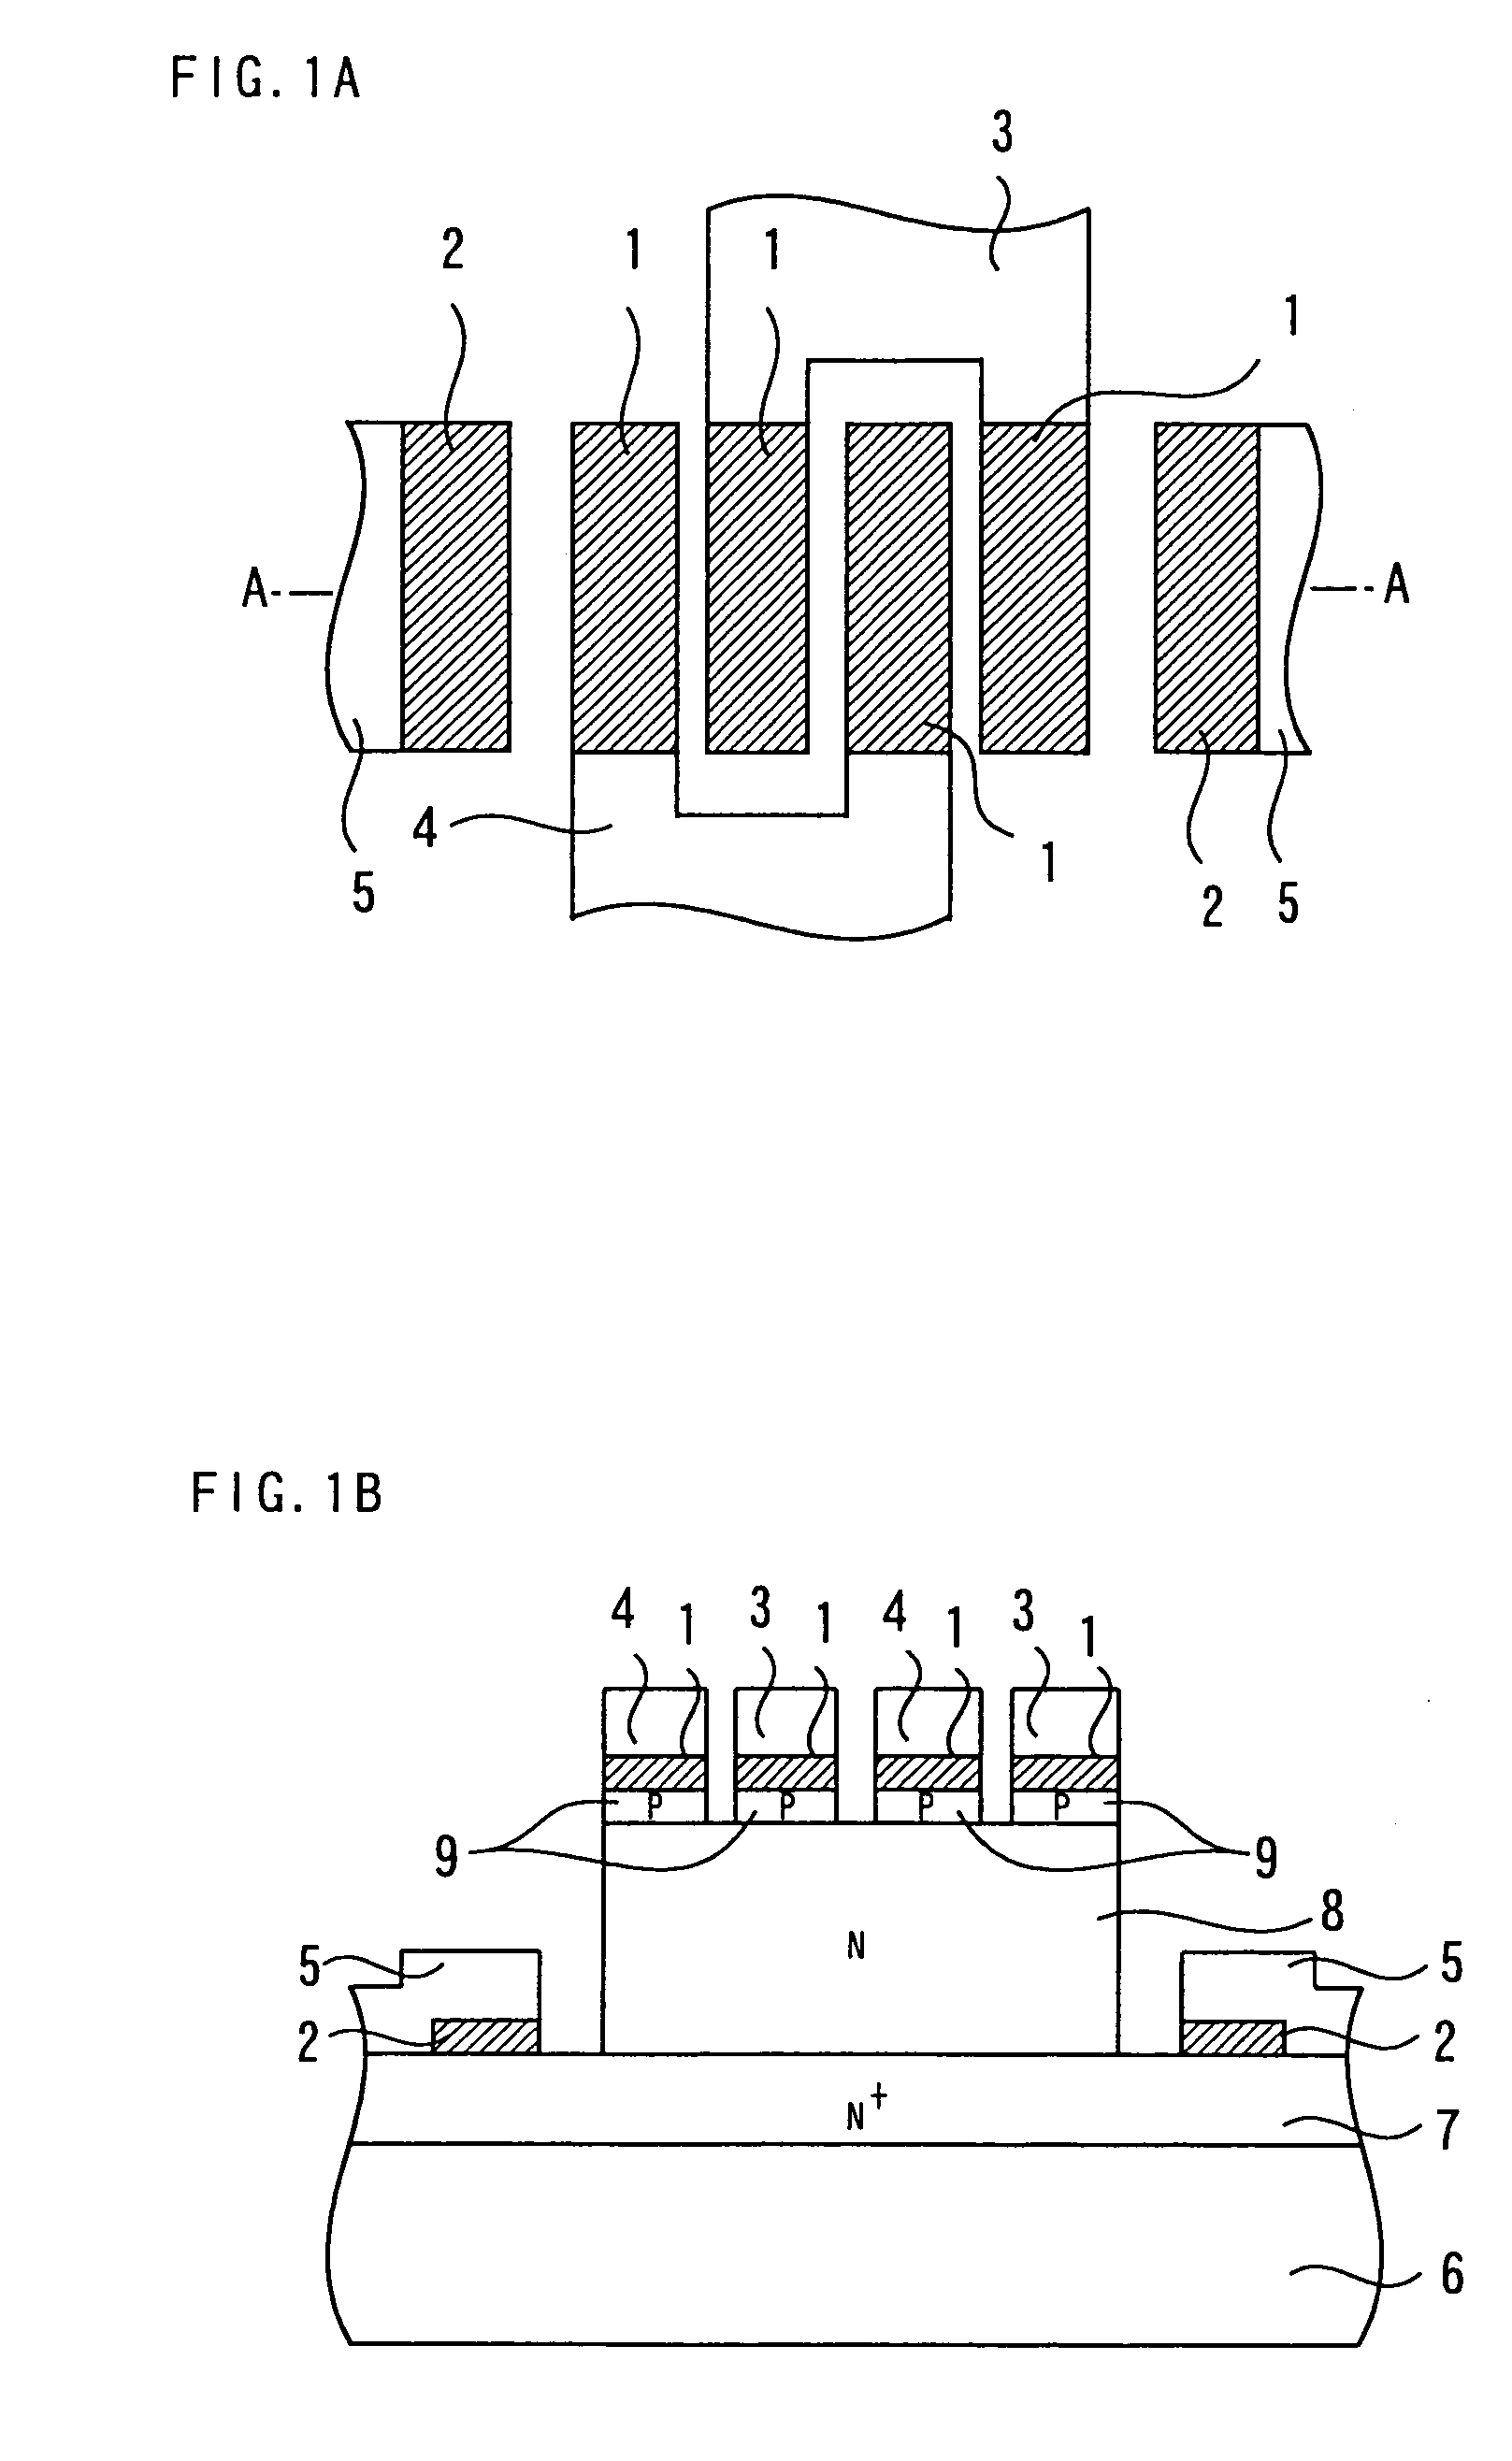 Semiconductor device having an improved voltage controlled oscillator